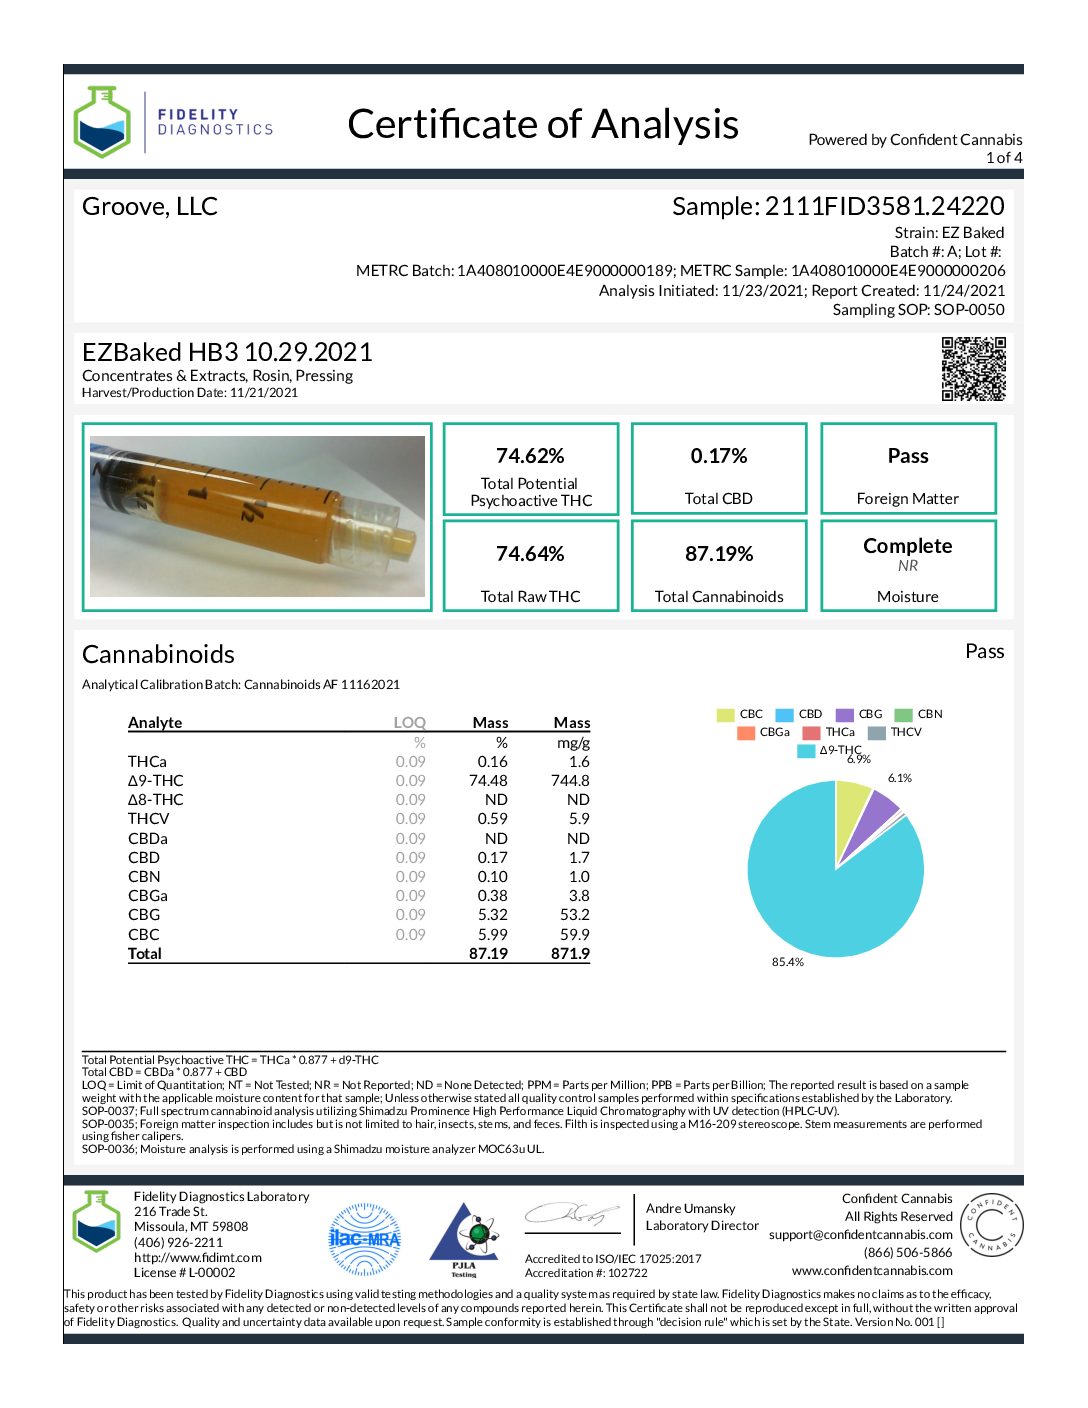 https://groovesolventless.com/wp-content/uploads/2021/11/EZBaked-HB3-10.29.2021-Rosin-Extract-pdf.jpg